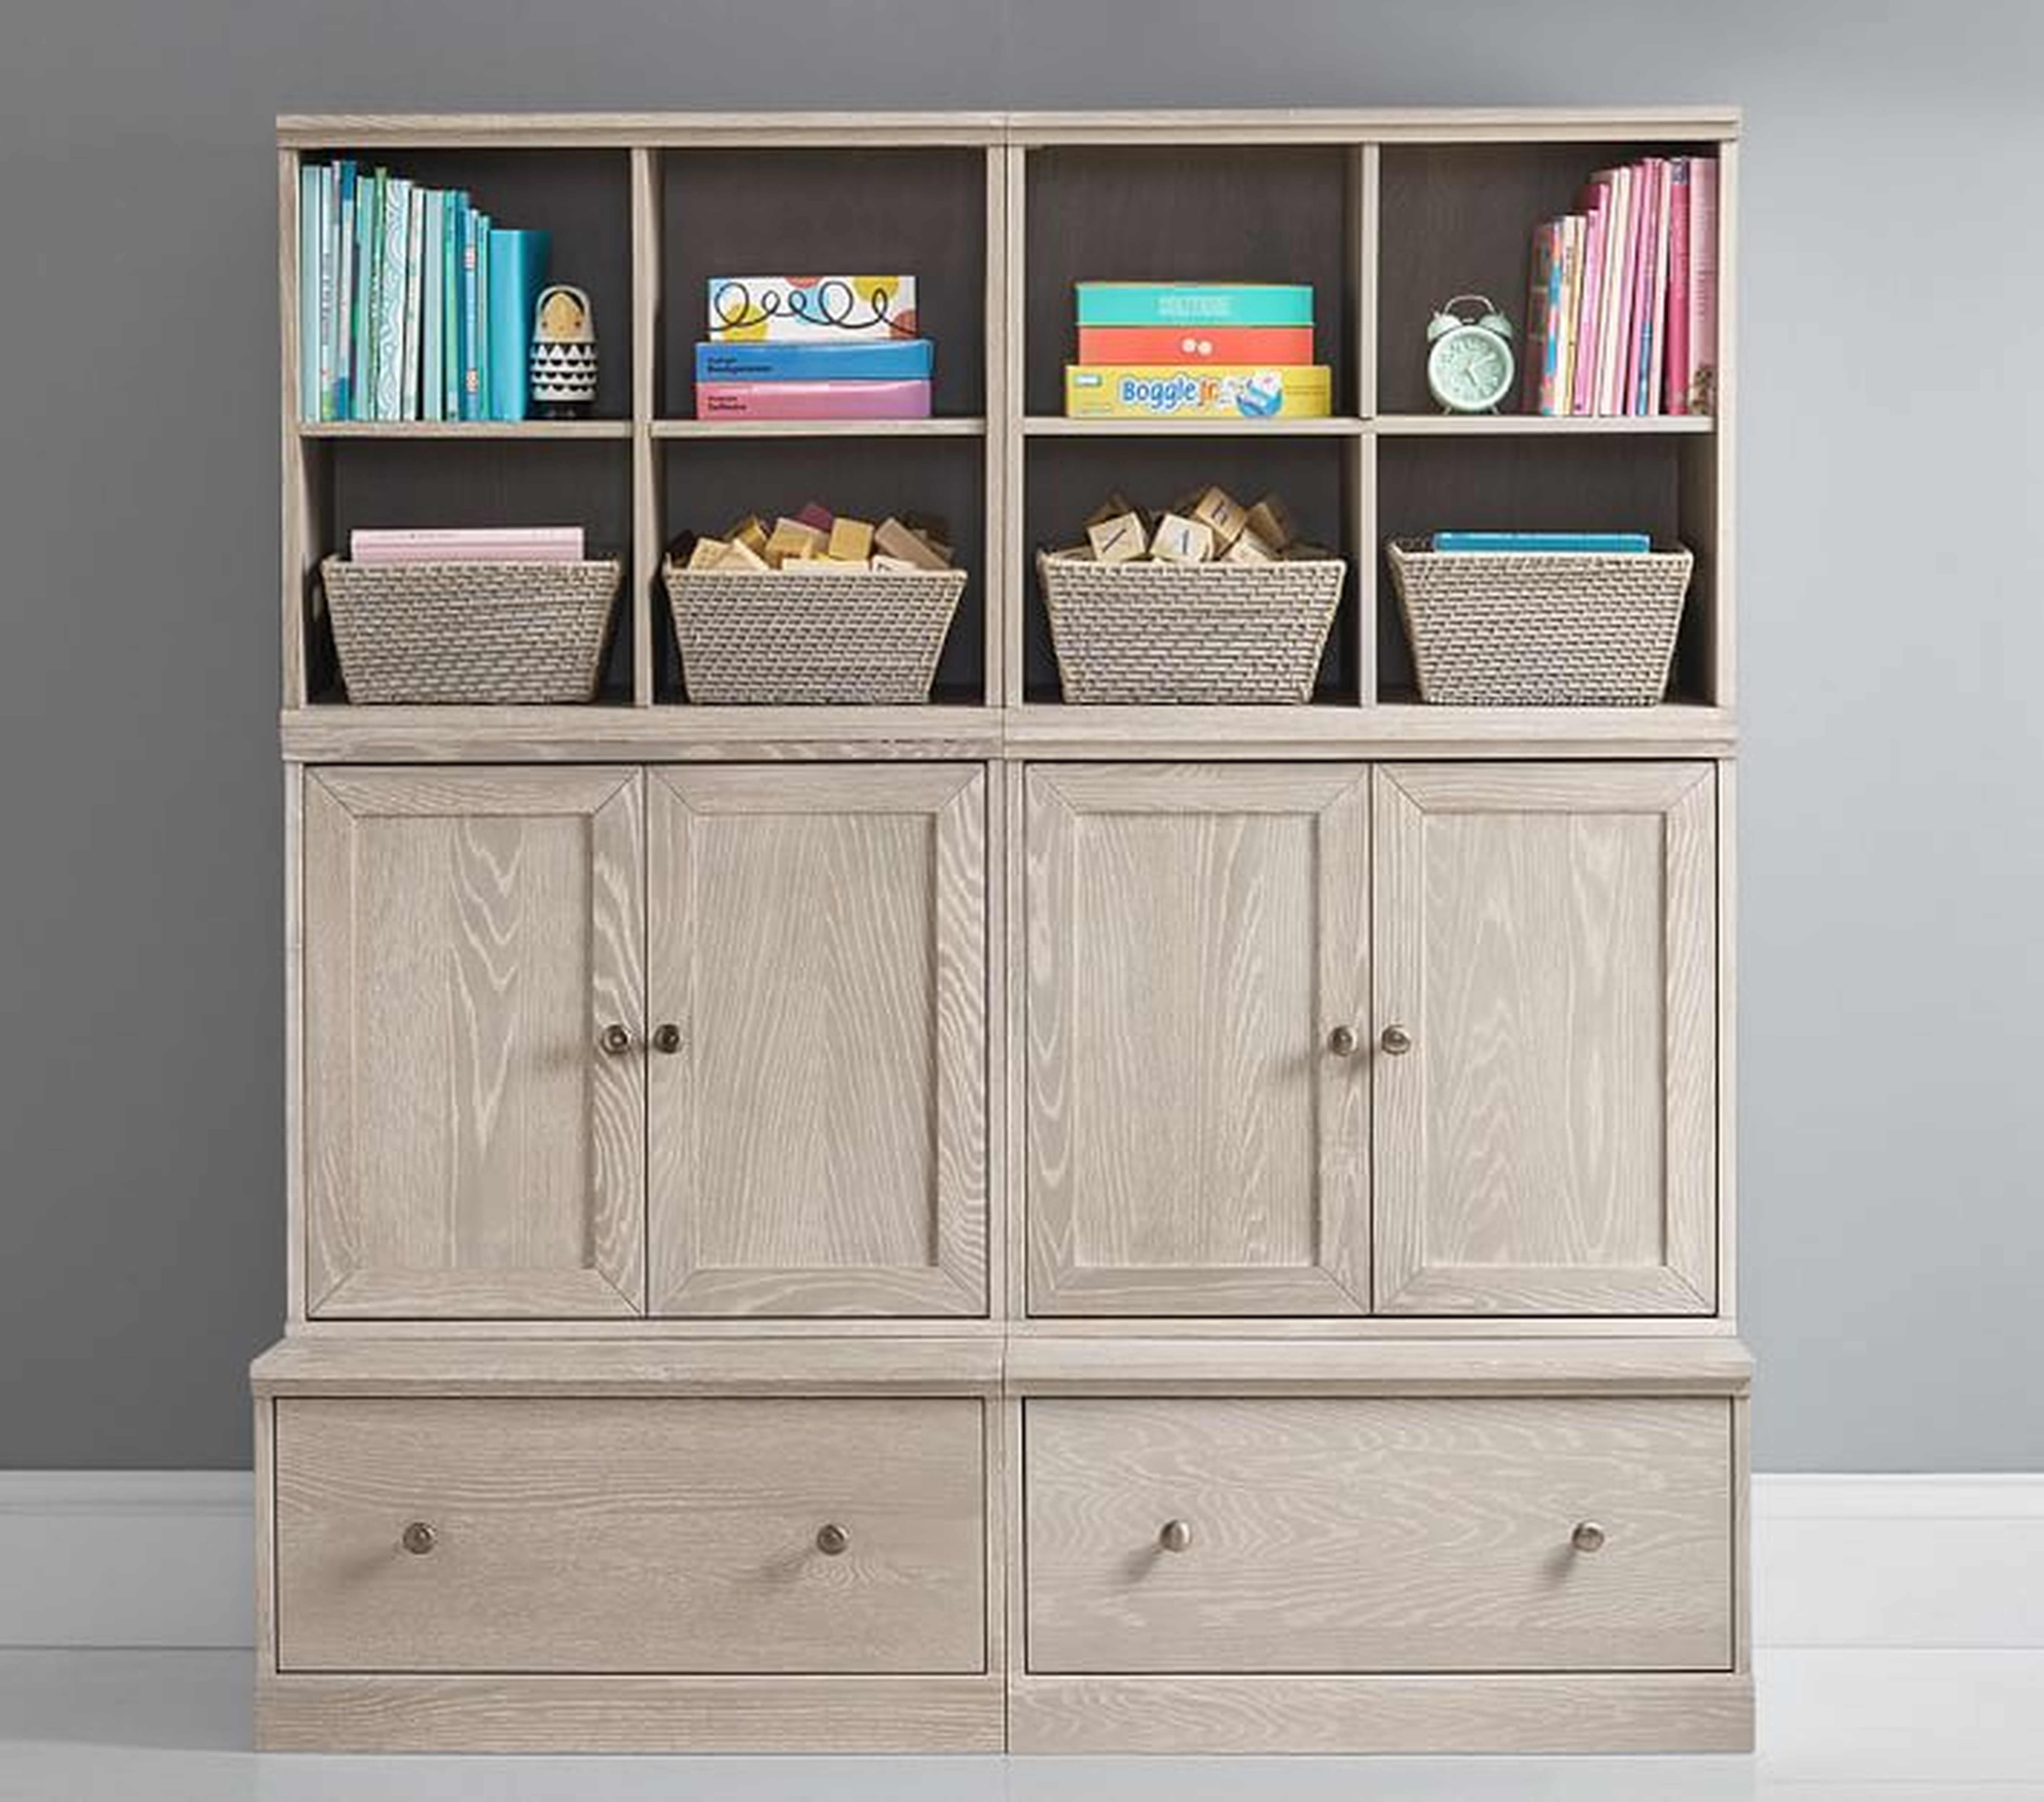 Cameron 2 Bookcase Cubbies, 2 Cabinets, & 2 Drawer Bases, Heritage Fog, UPS - Pottery Barn Kids